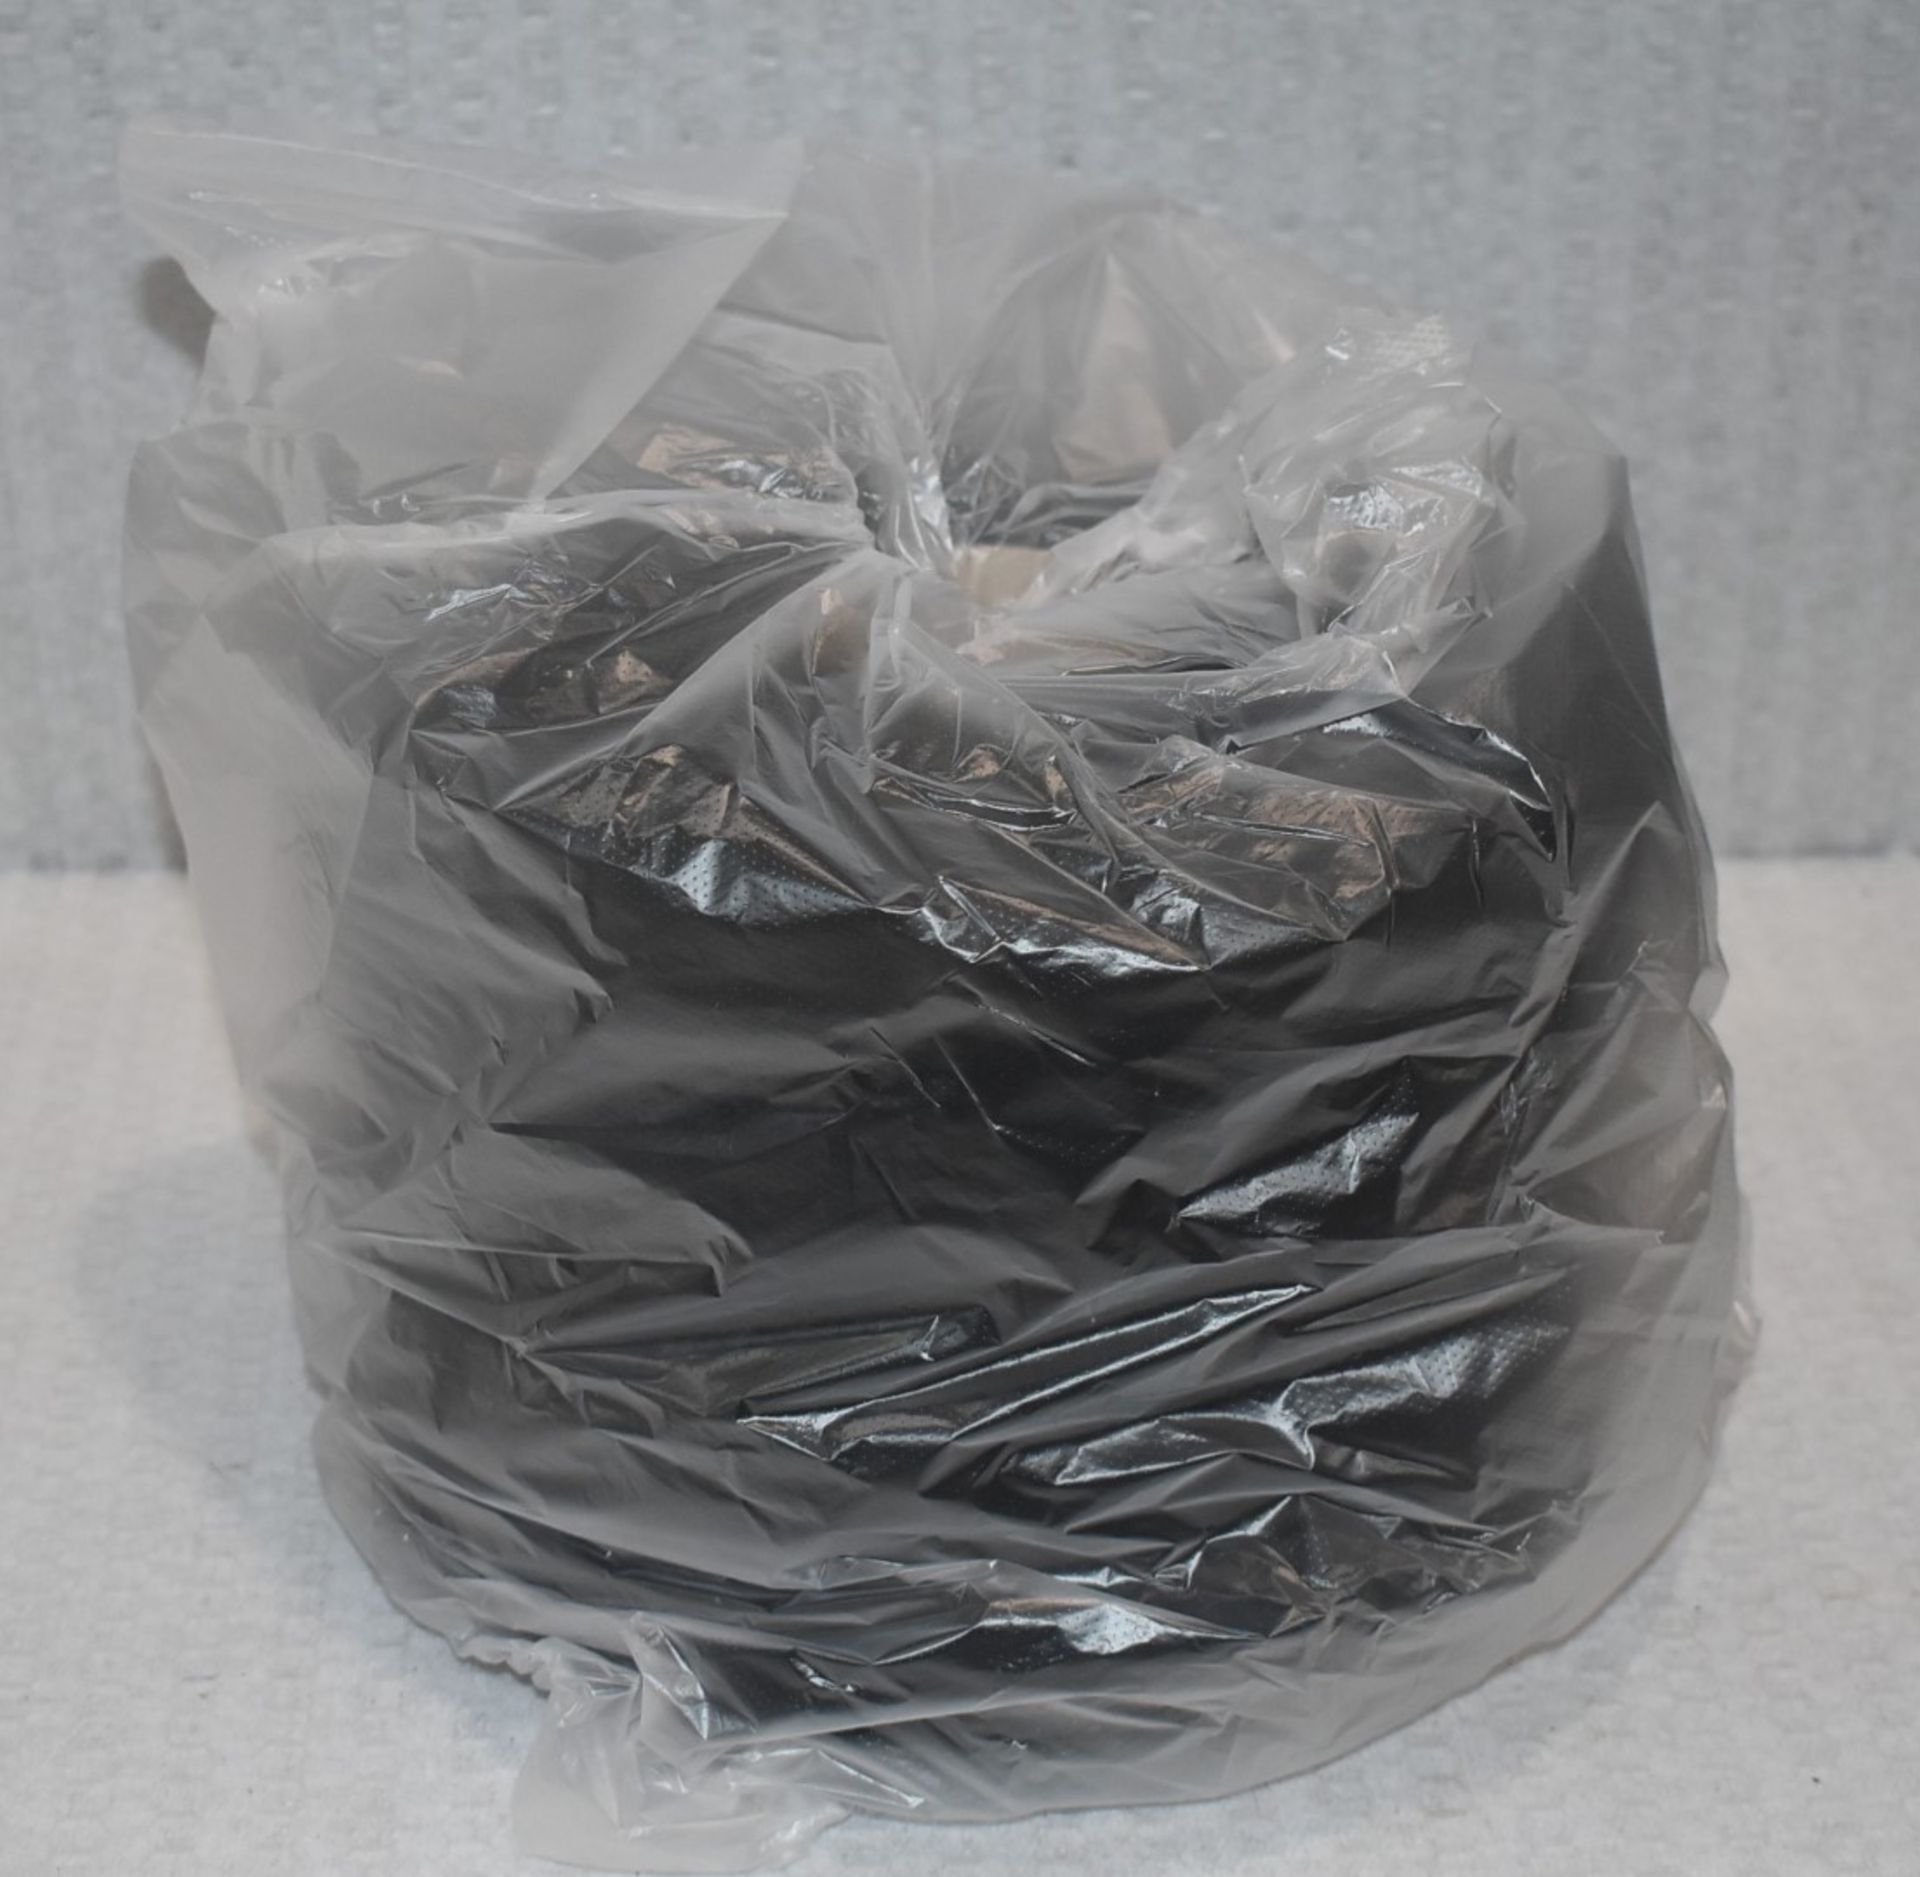 6 x Cones of 1/7,5 Lagona Knitting Yarn - Charcoal - Approx Weight: 2,300g - New Stock ABL Yarn - Image 5 of 11